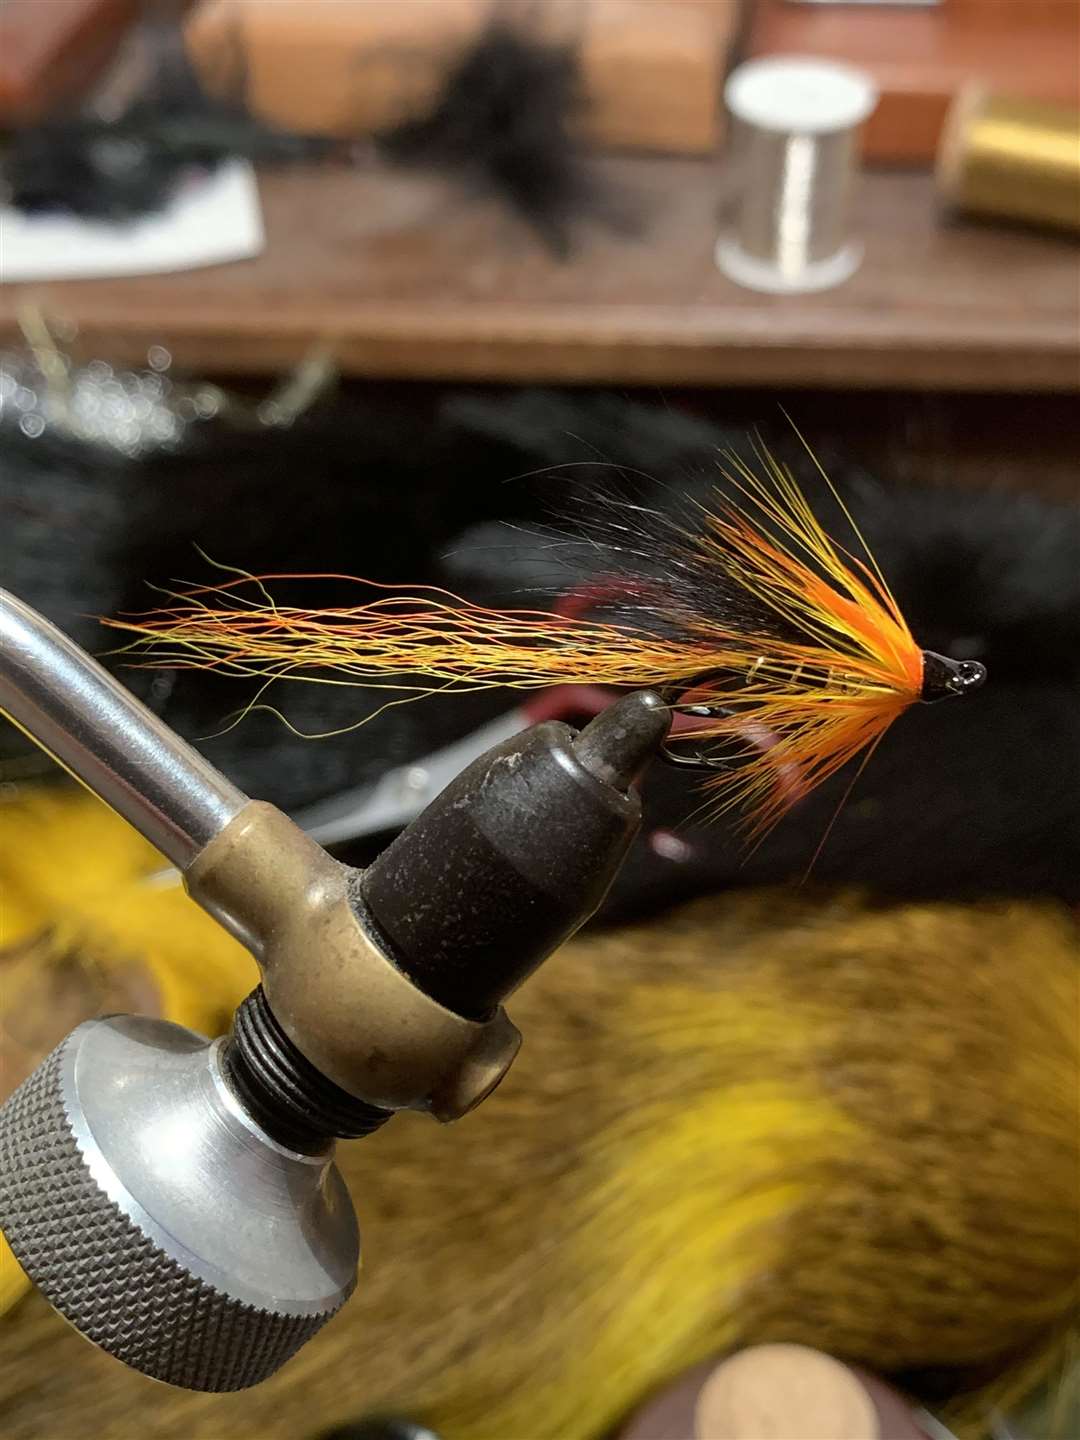 A Cascade salmon fly which has just had varnish applied.